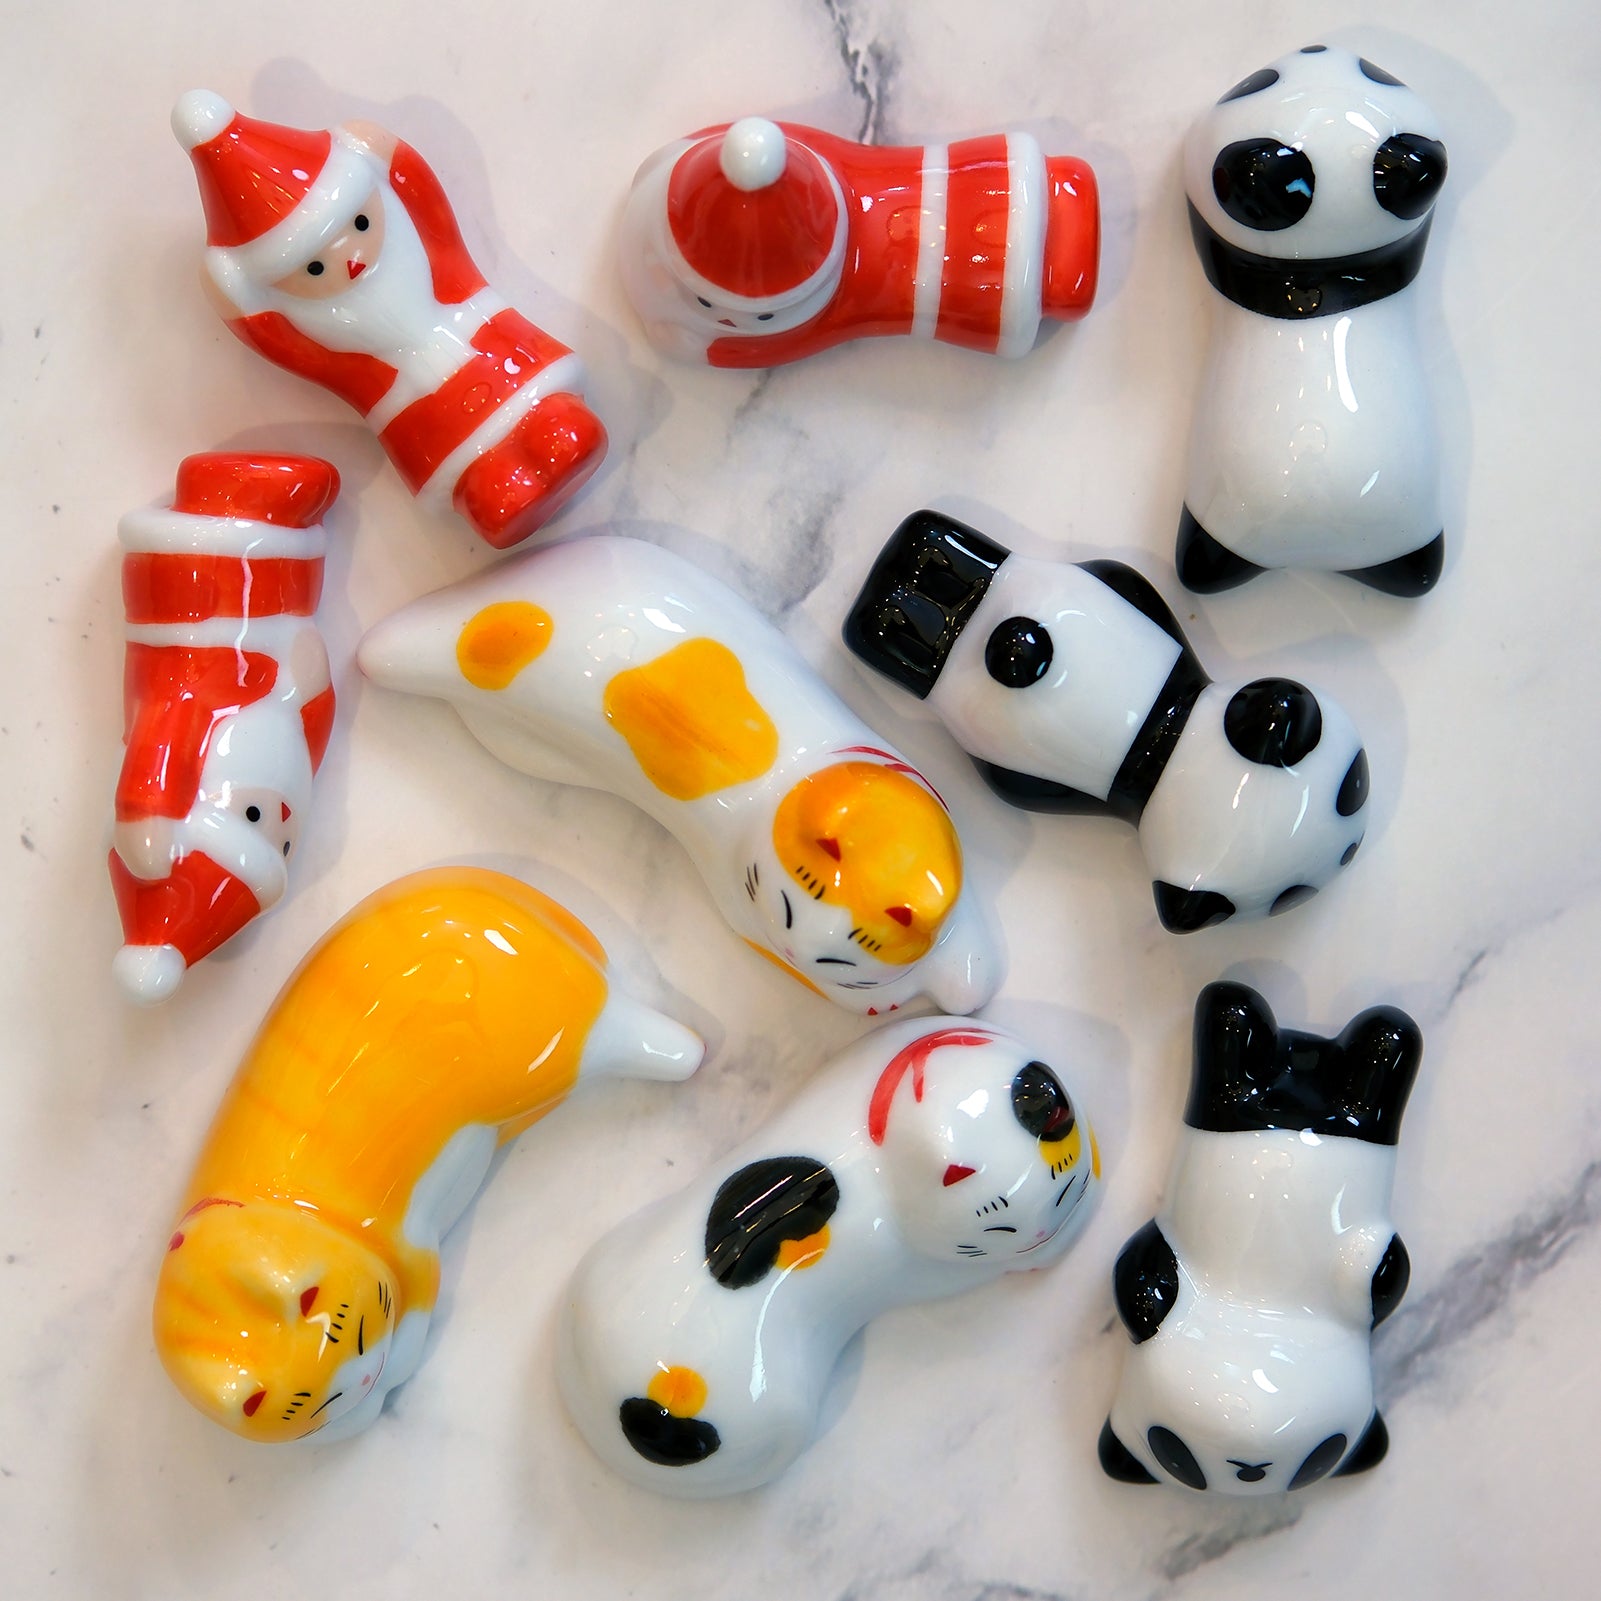 Handcrafted Ceramic Chopsticks Rest with designs of cats, pandas, and Christmas Santa Claus (9PC)